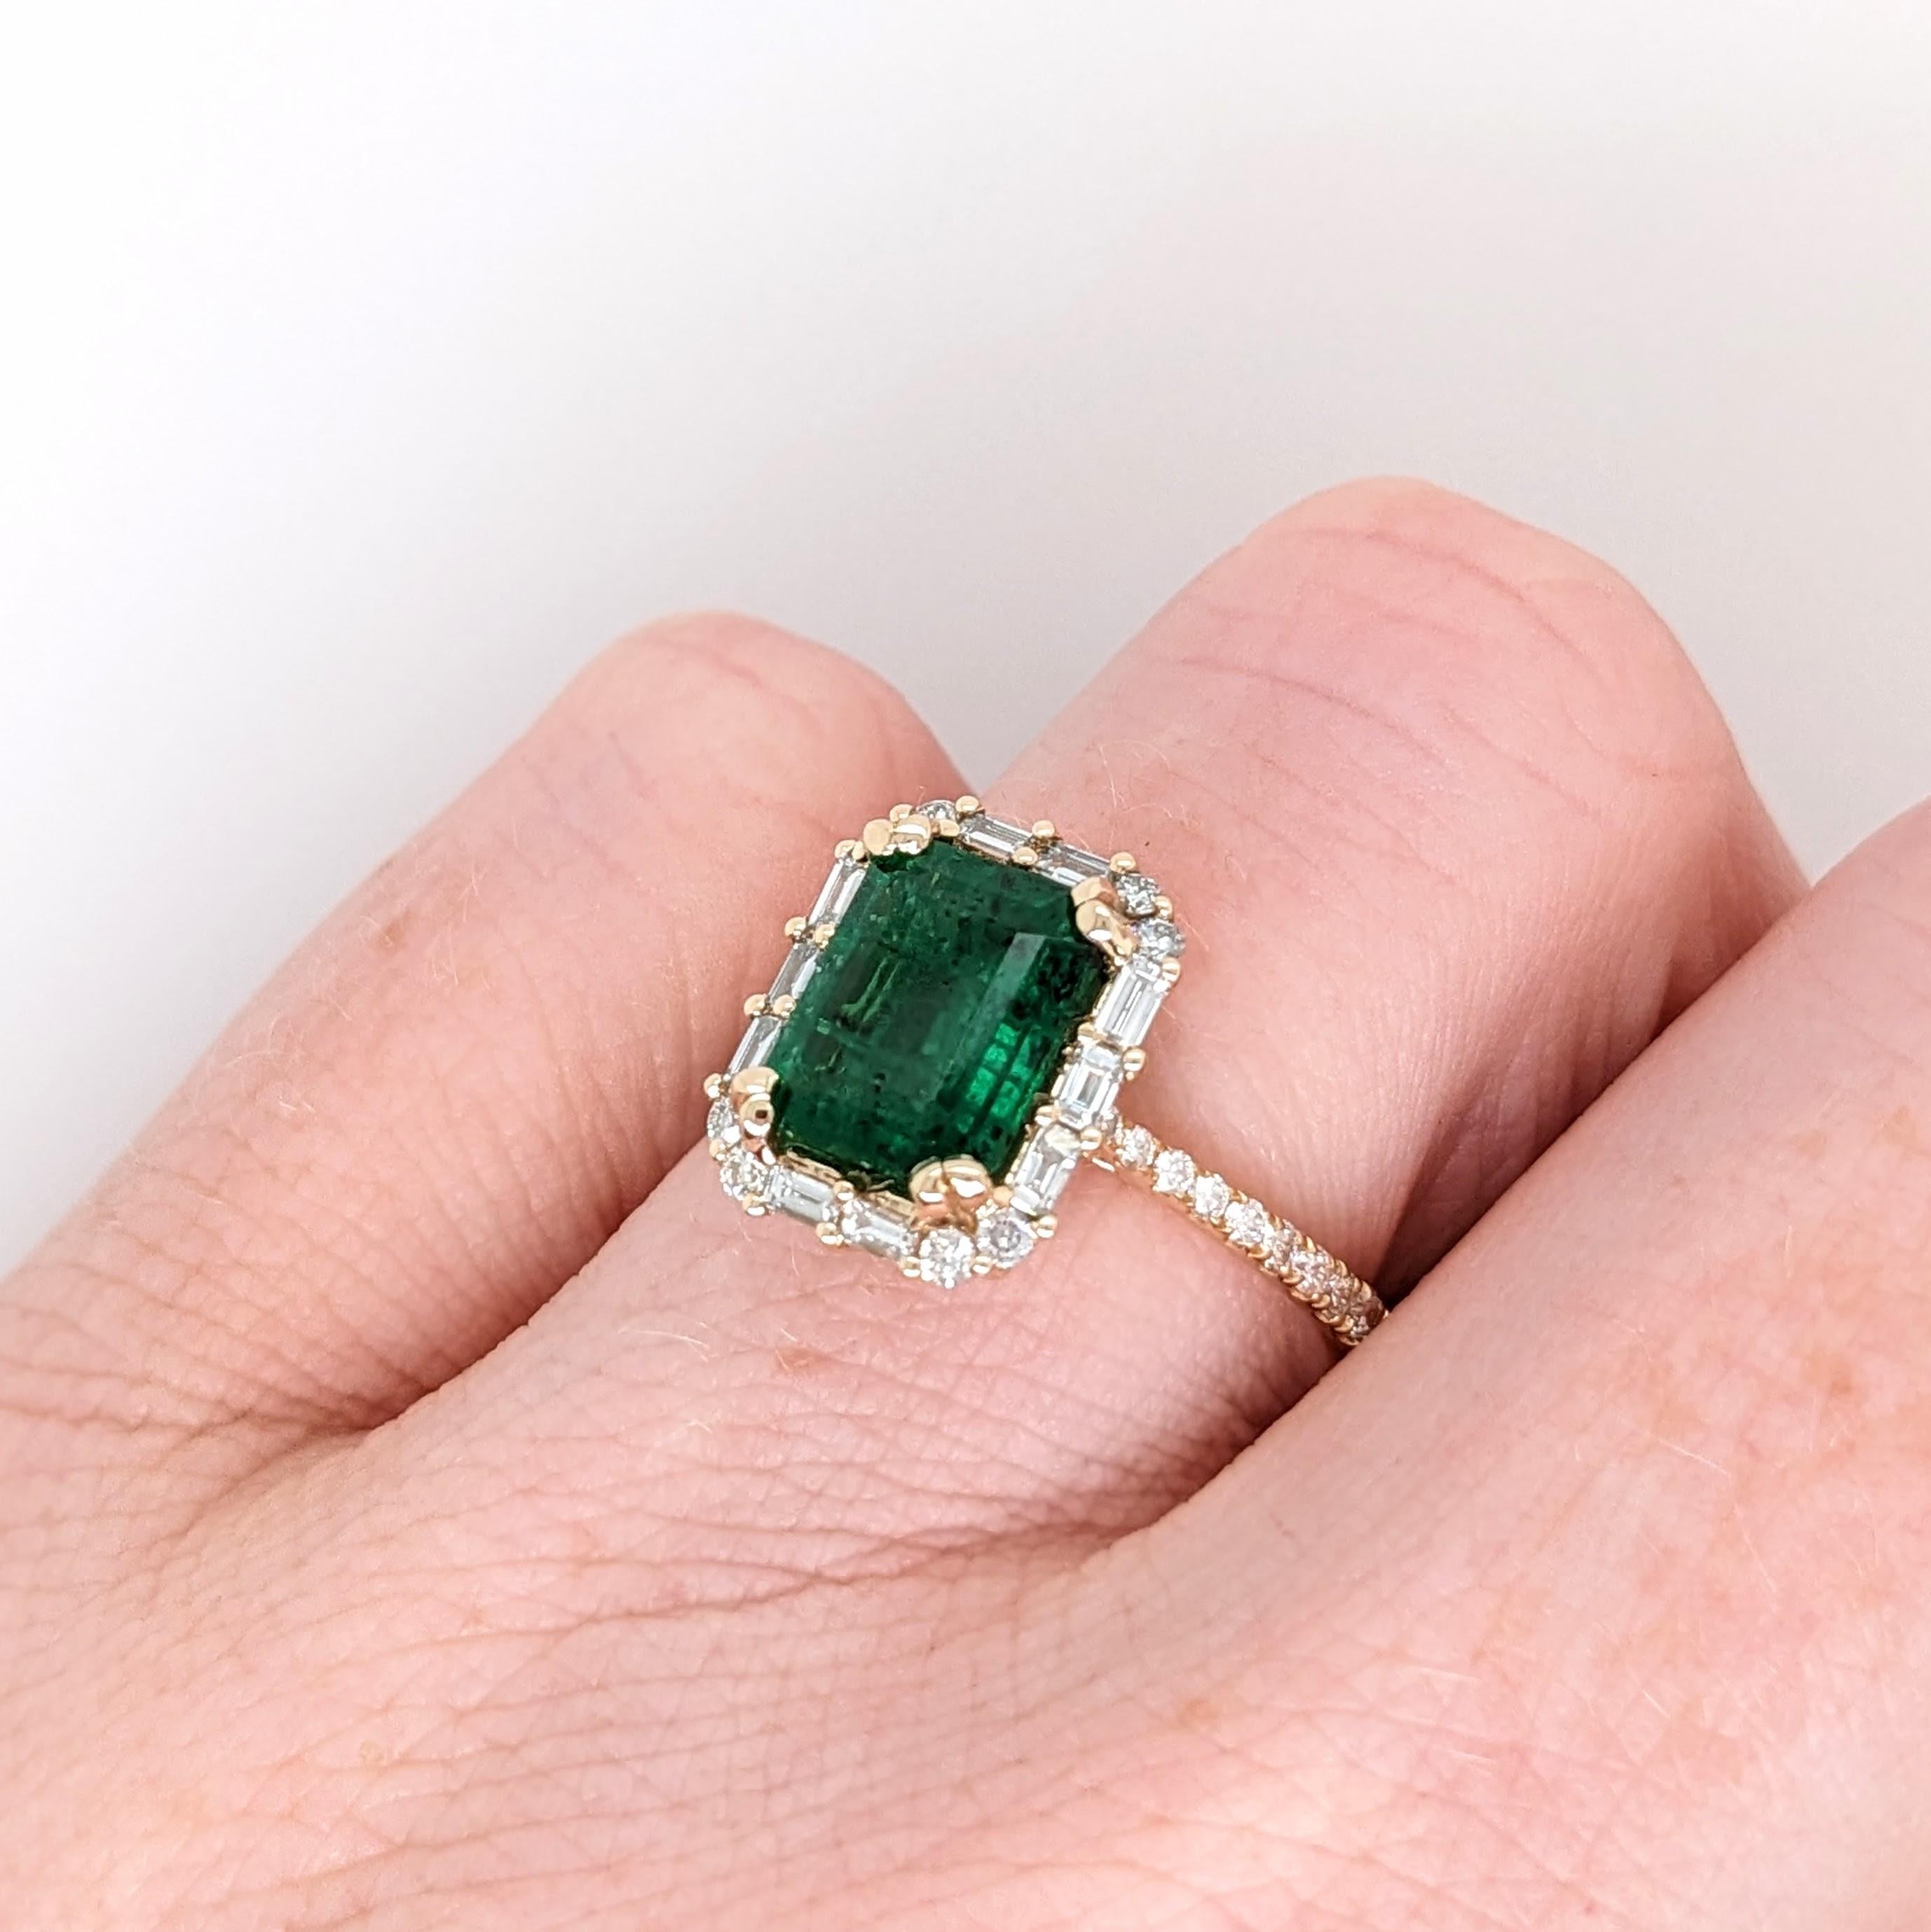 2ct Emerald Ring w Natural Diamonds in Solid 14k Yellow Gold Emerald cut 9x7mm For Sale 2